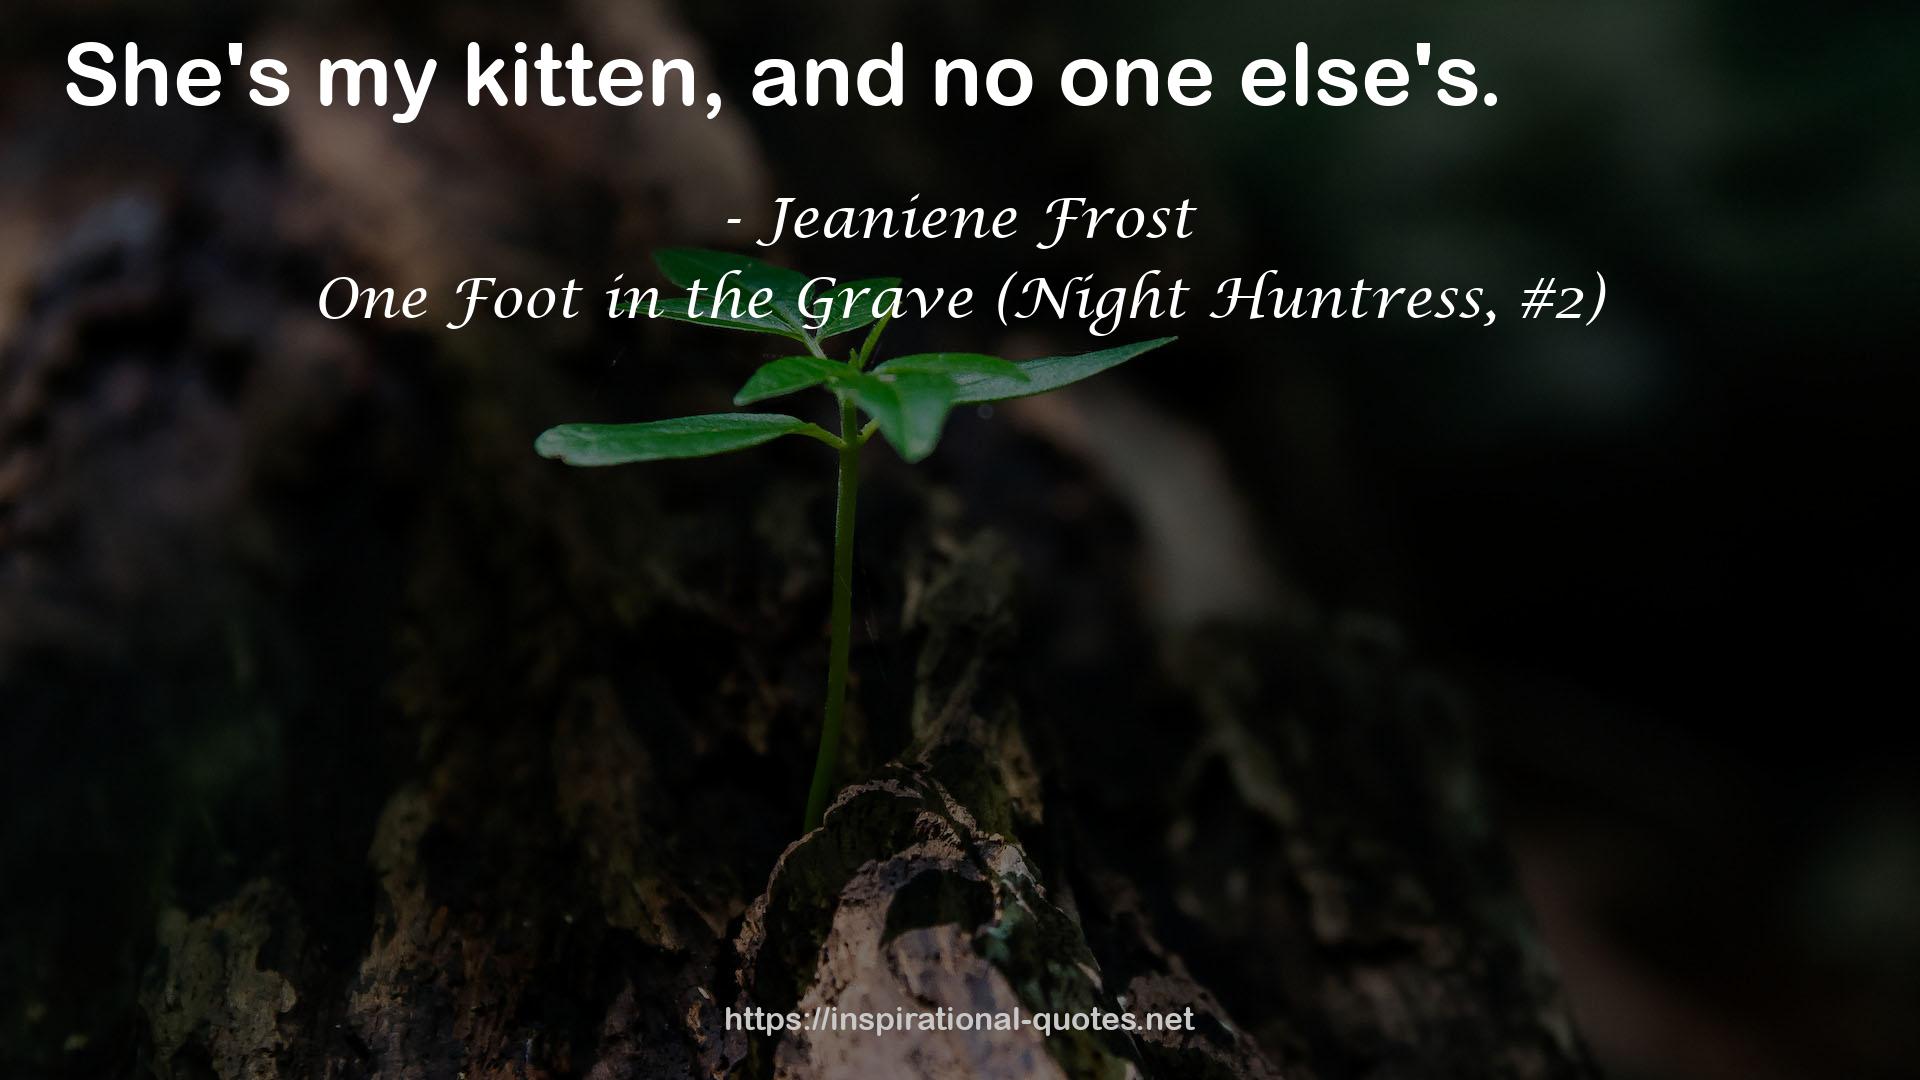 One Foot in the Grave (Night Huntress, #2) QUOTES